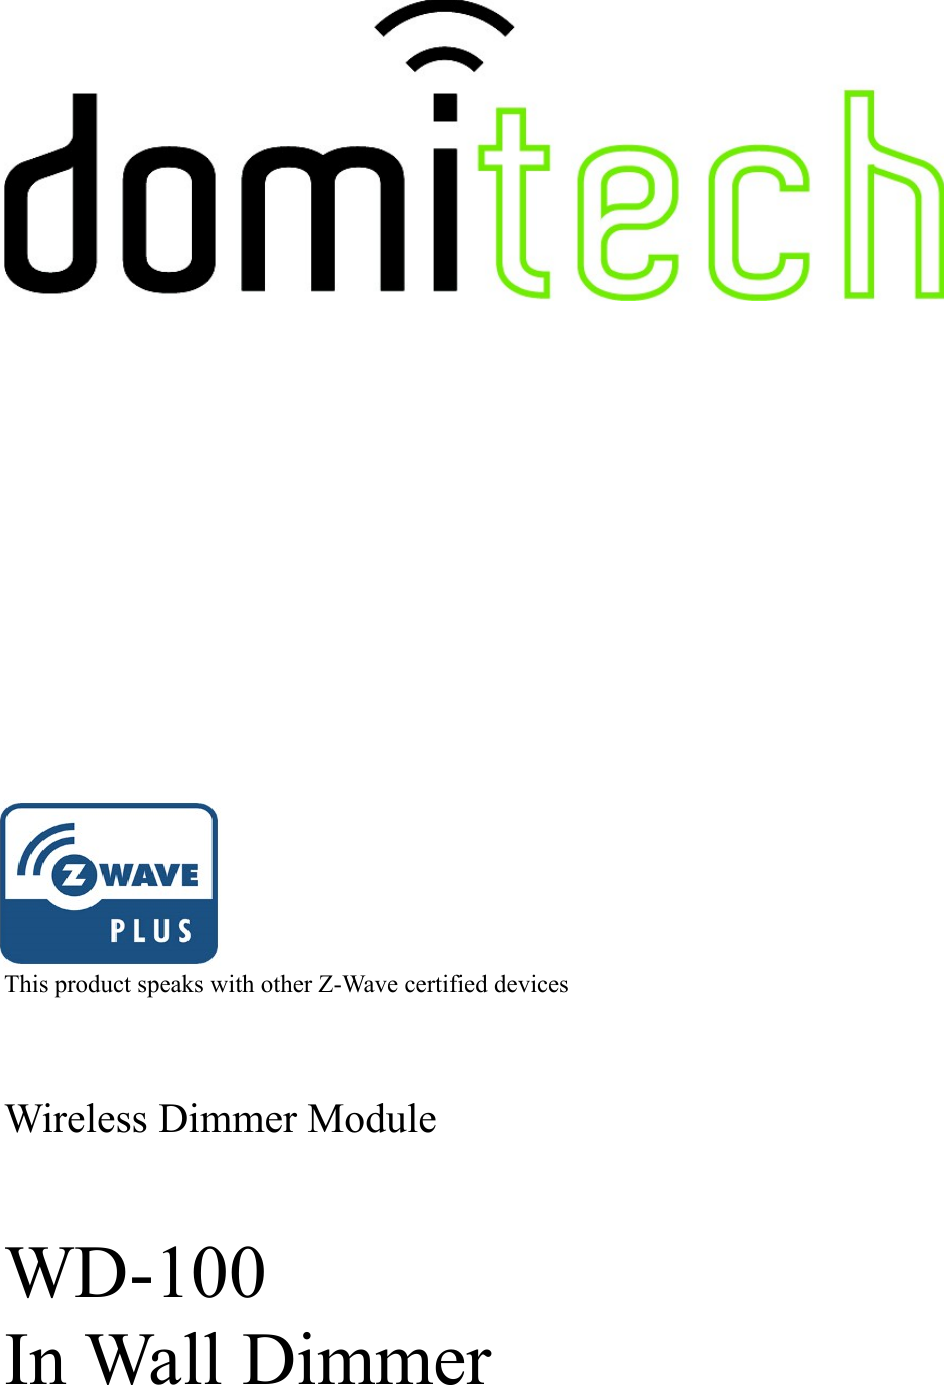                                This product speaks with other Z-Wave certified devicesWireless Dimmer ModuleWD-100In Wall Dimmer 